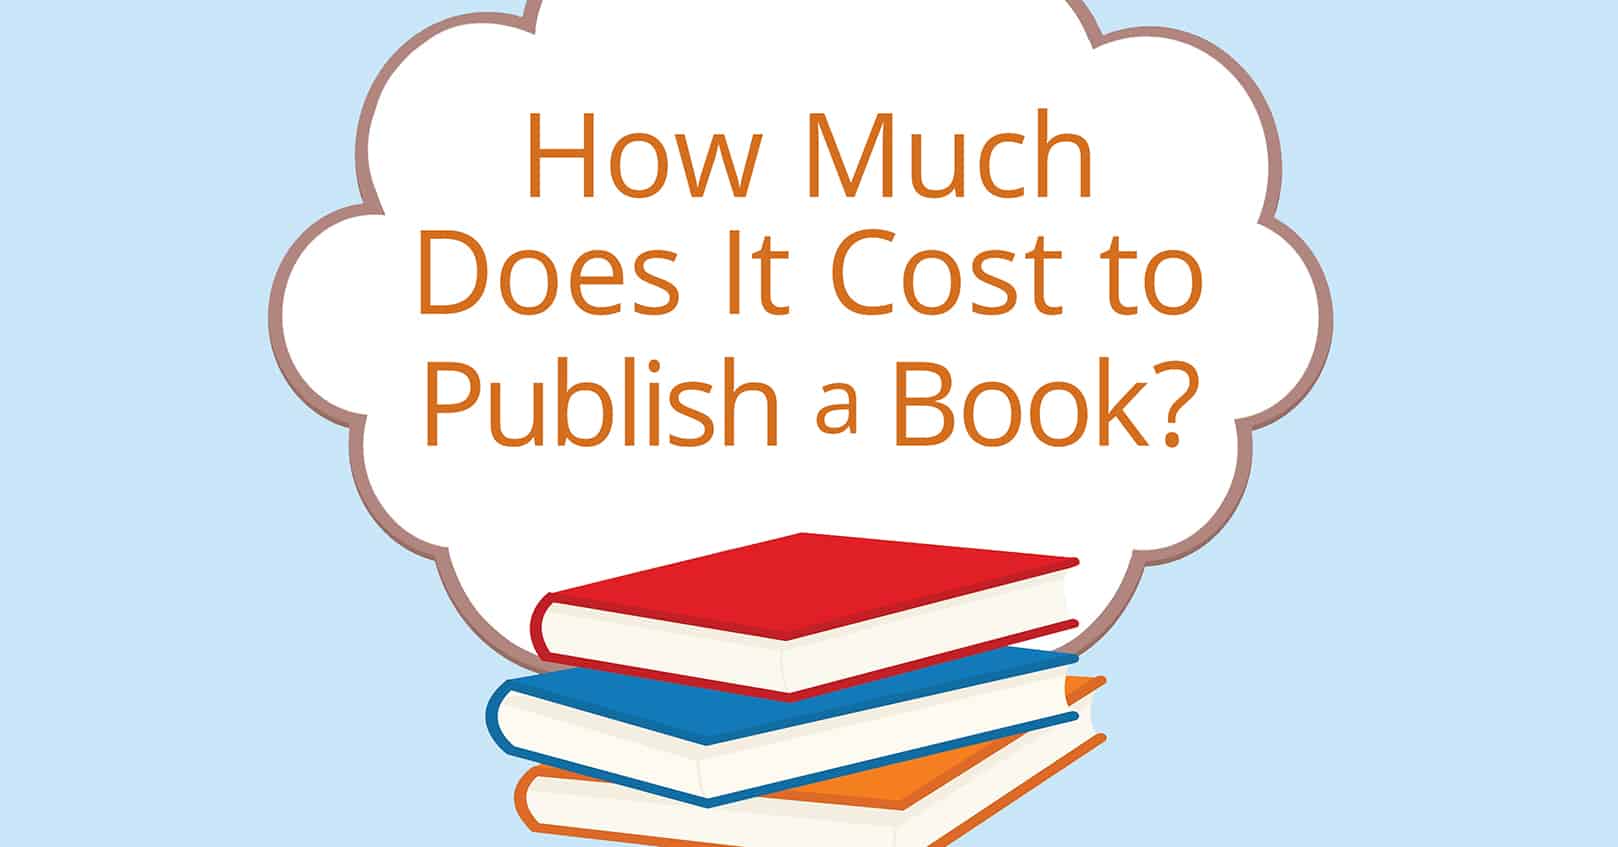 how much does it cost to publish a book?